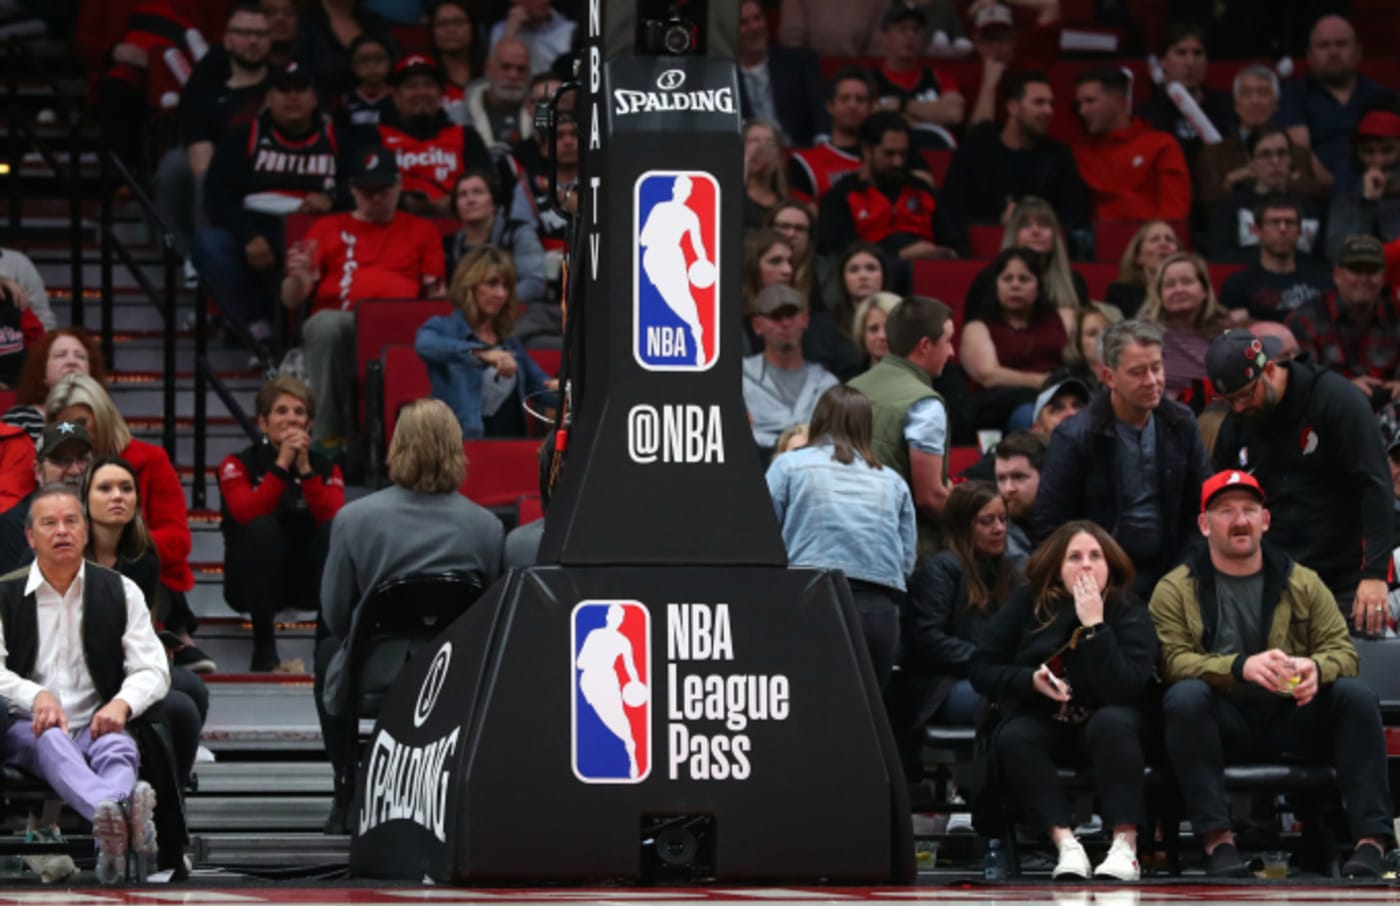 A general view of the NBA logo on the basketball hoop